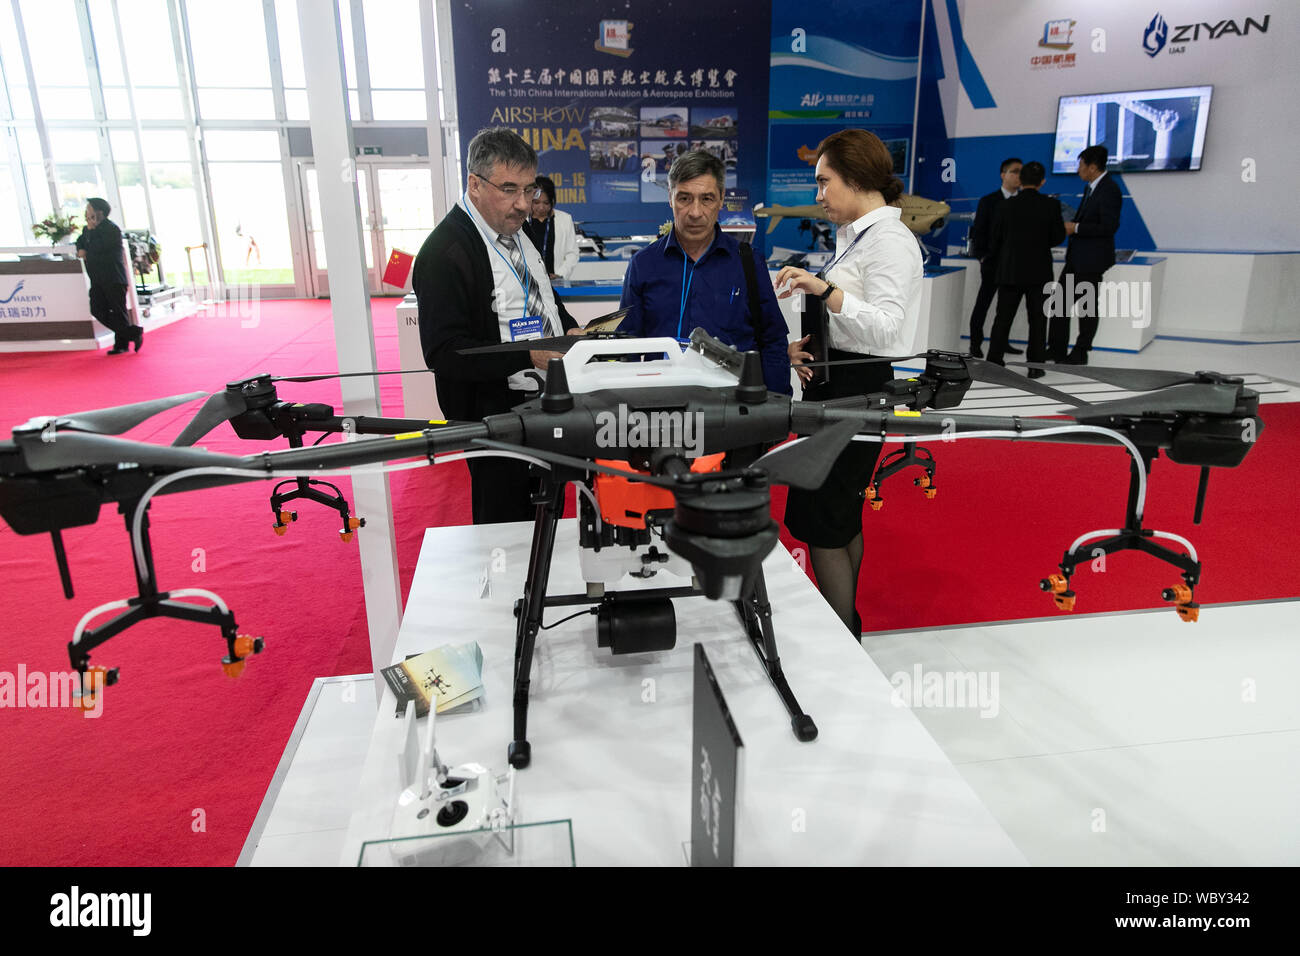 Moscow, Russia. 27th Aug, 2019. People view DJI agricultural drone during  the international aviation and space salon MAKS 2019 in Zhukovsky, Russia,  Aug. 27, 2019. The air show kicked off on Tuesday.